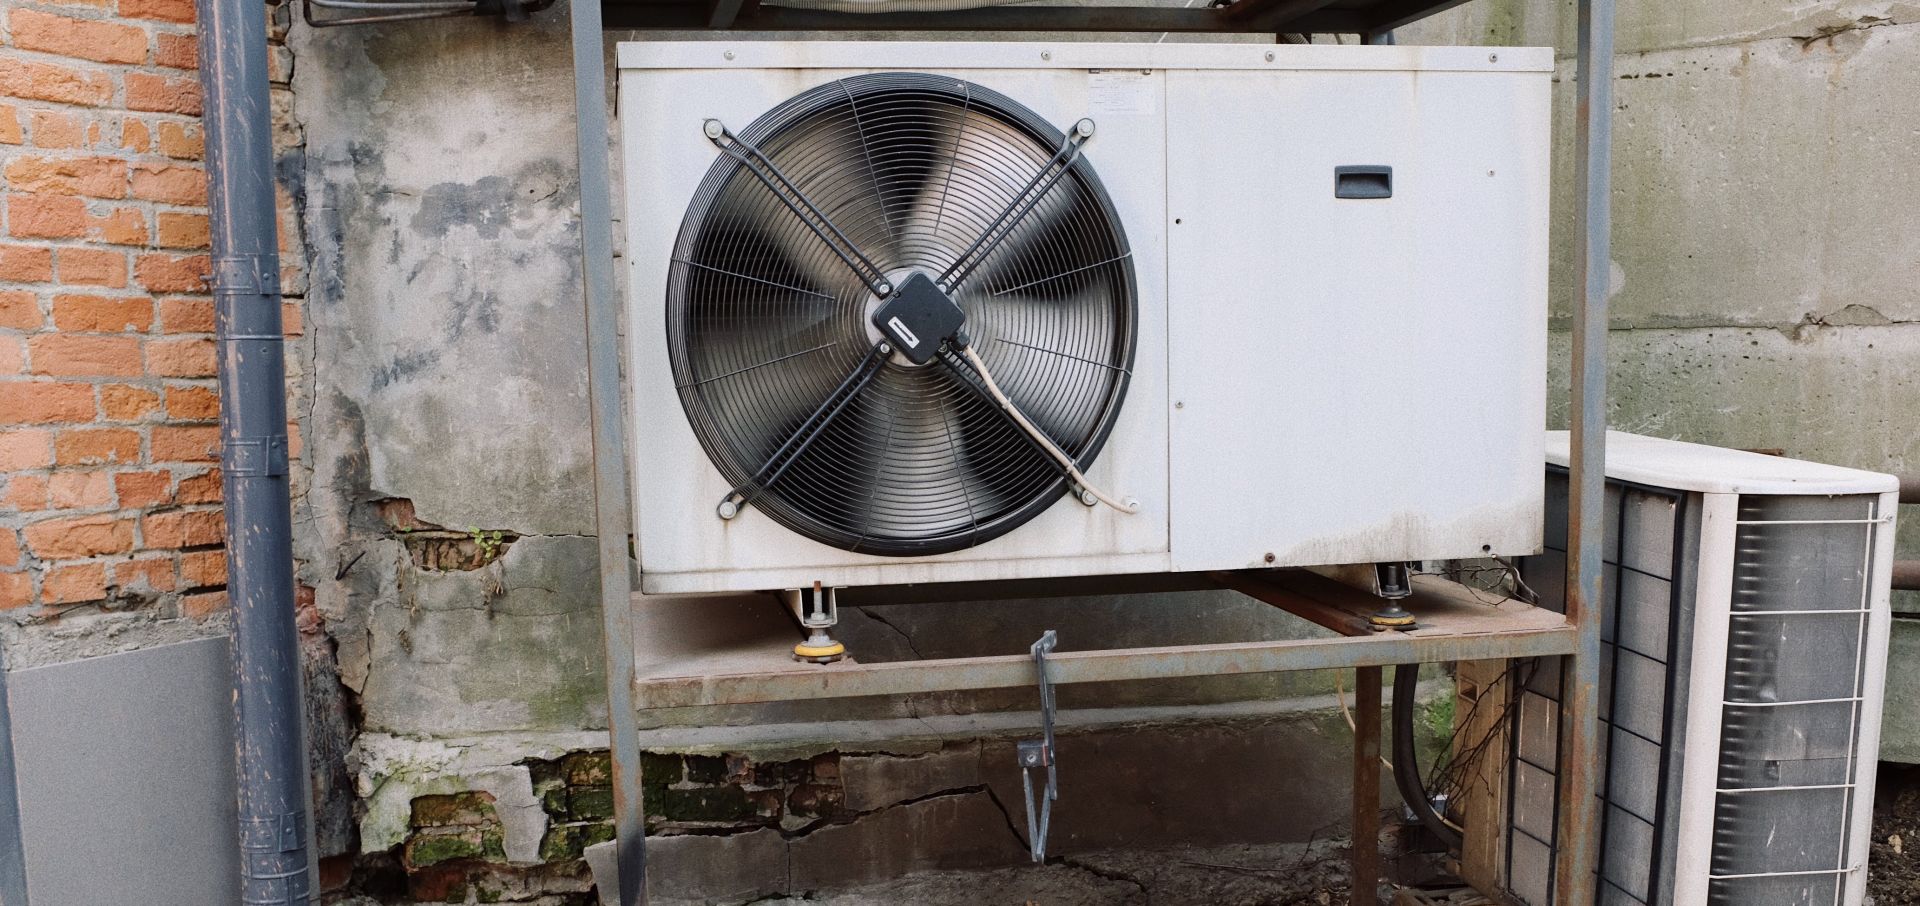 Air conditioner unit near wall of modern building on street